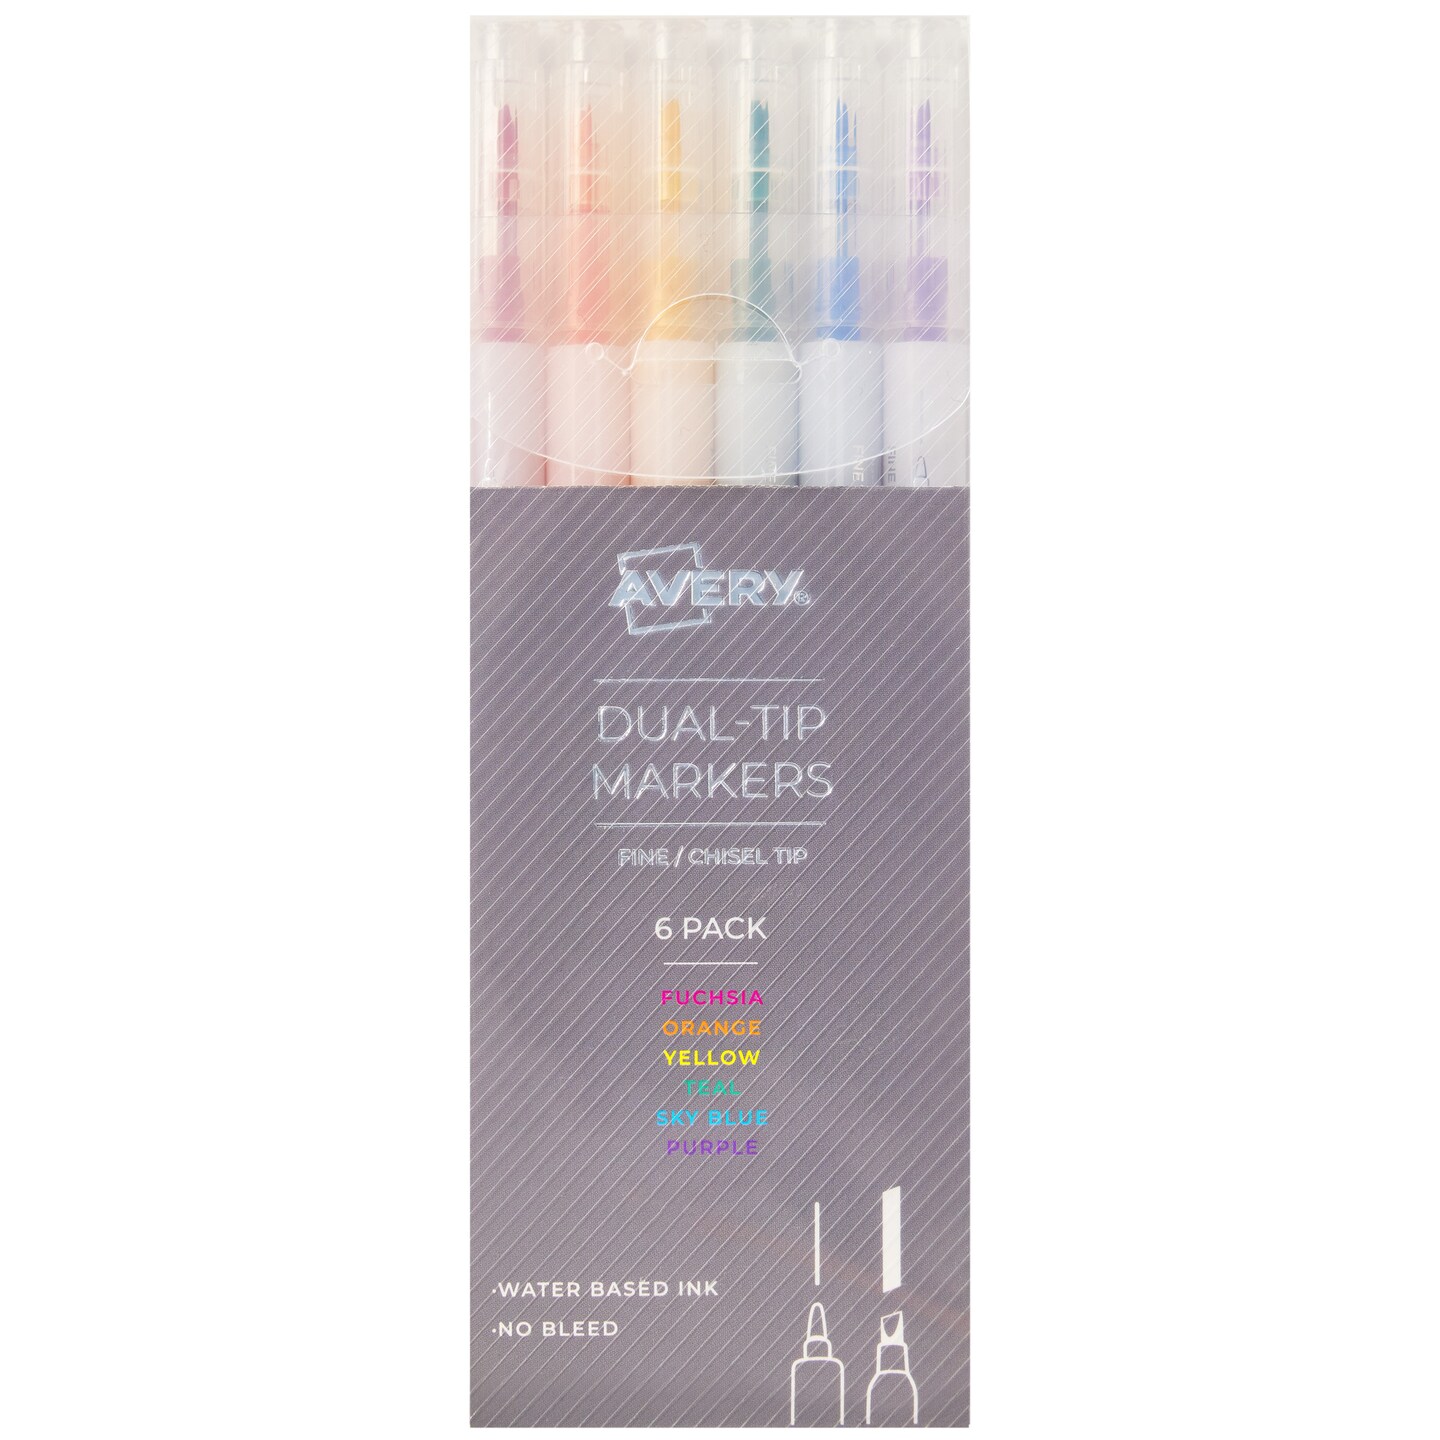 Avery Dual Tip Markers, Fine Tip Marker and Chisel Tip Marker, Quick-Drying  Water-Based Markers, Rainbow Assortment, Ideal Planner Markers and Bullet  Journal Markers, 6-Pack (25004)